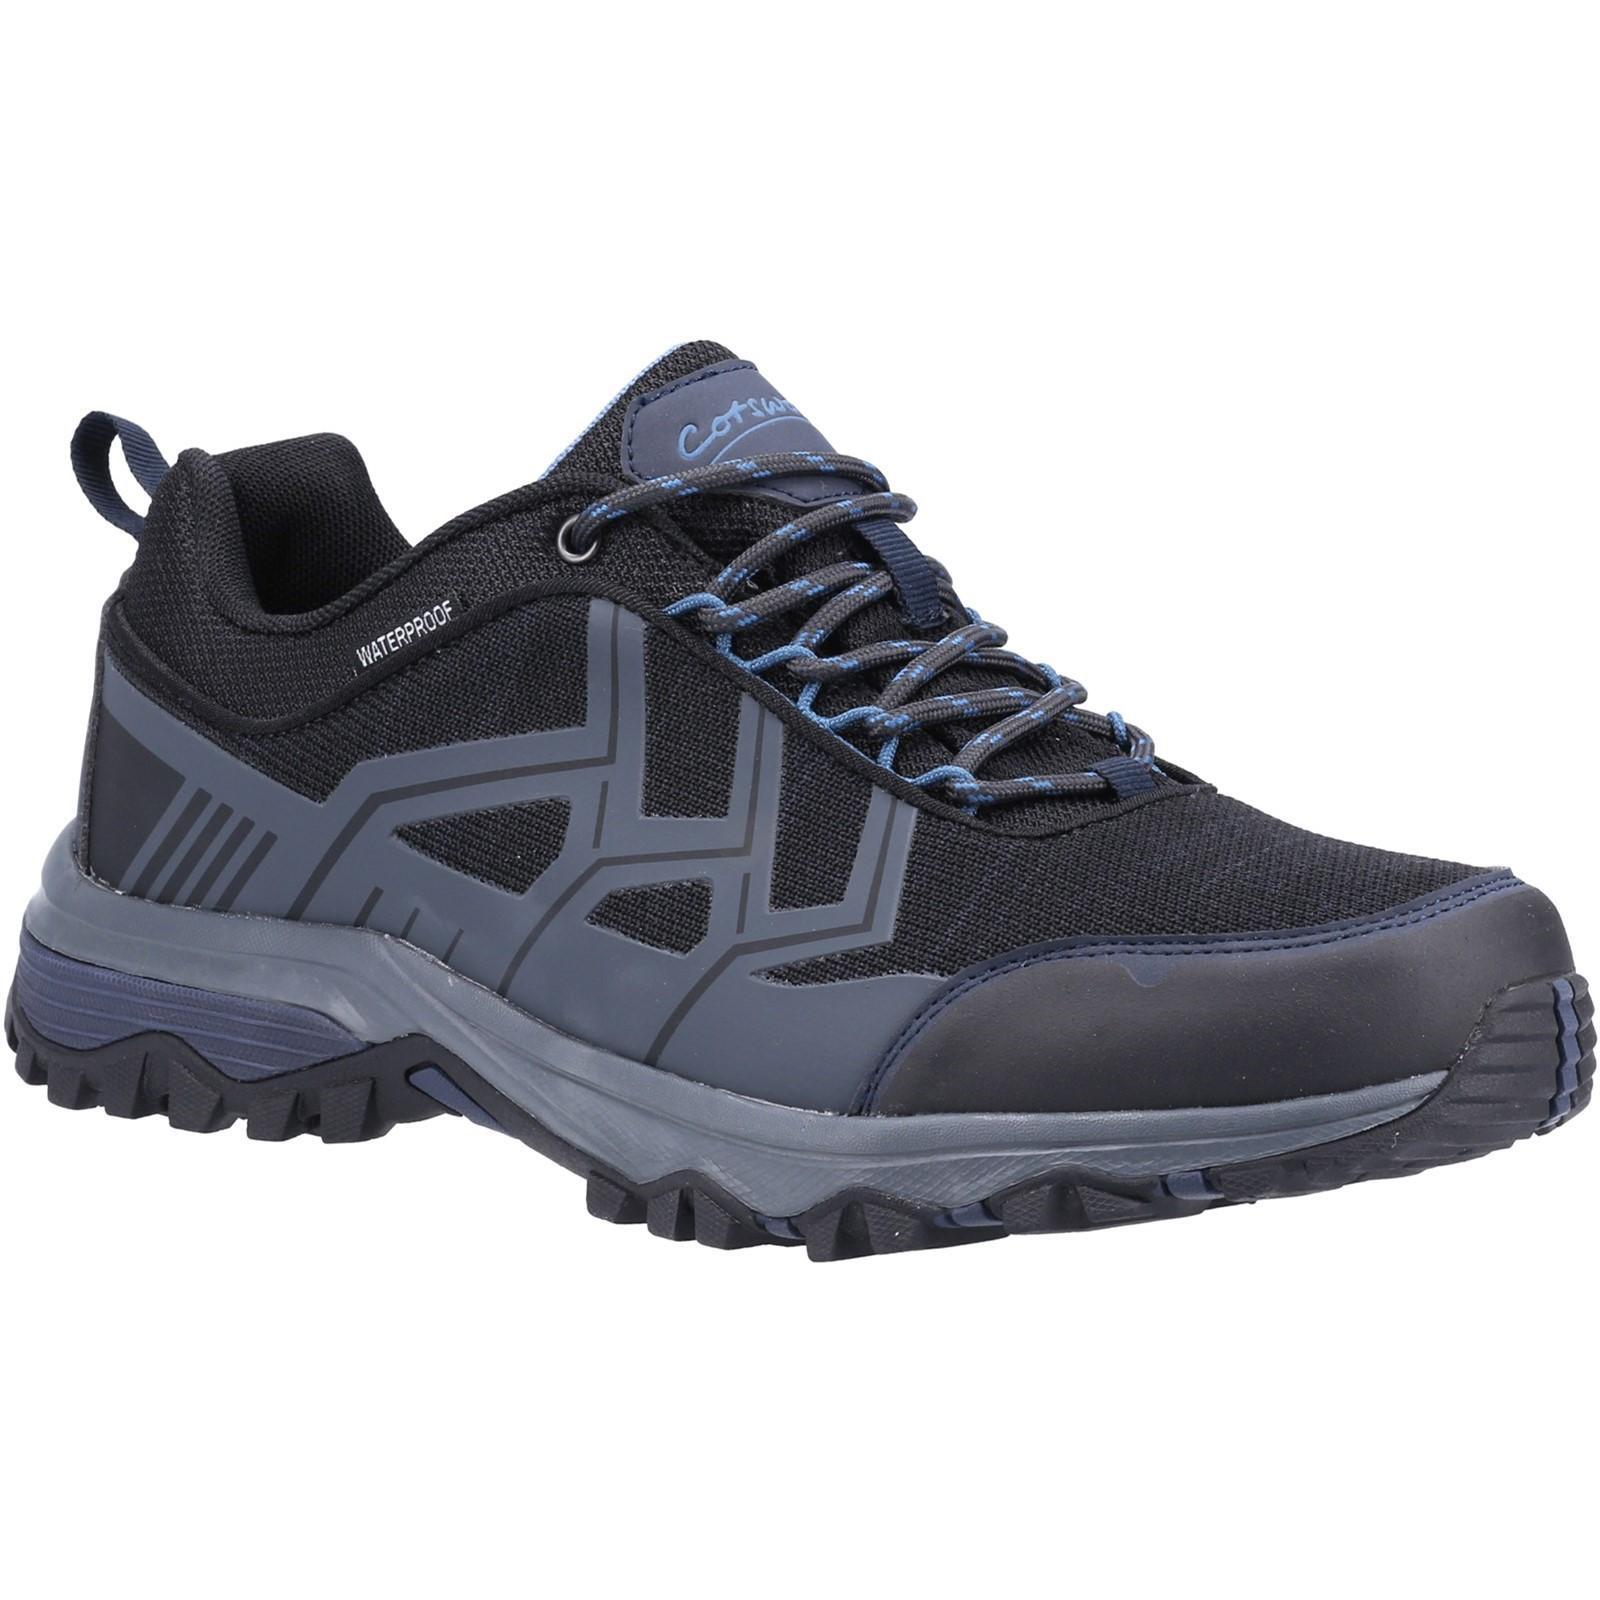 COTSWOLD Mens Wychwood Low WP Hiking Shoes (Black)